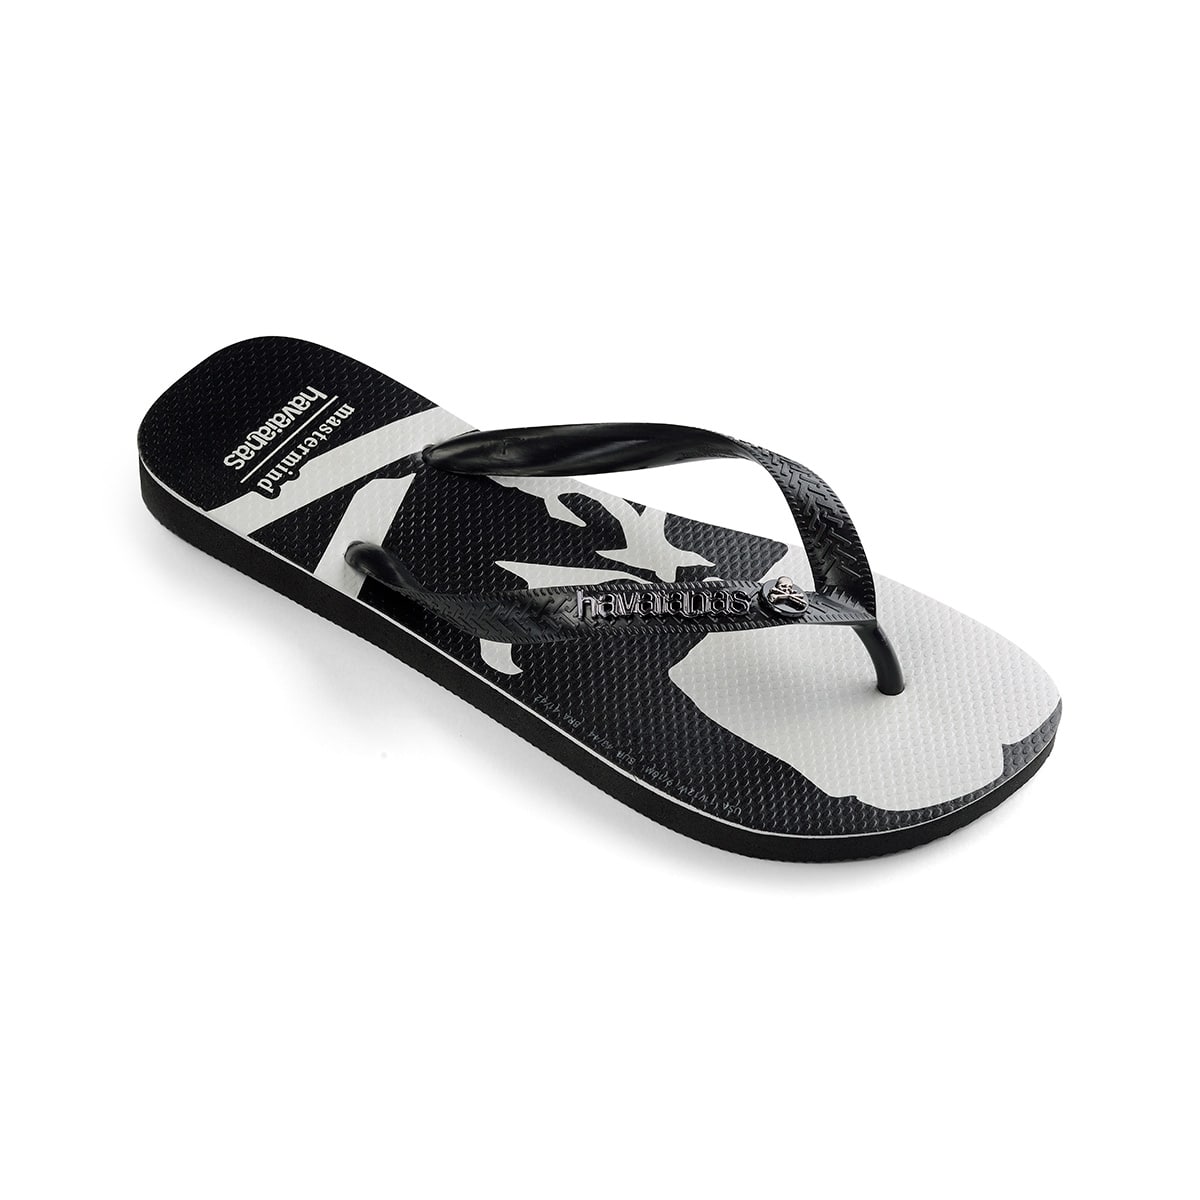 huaraches leather sandals mens